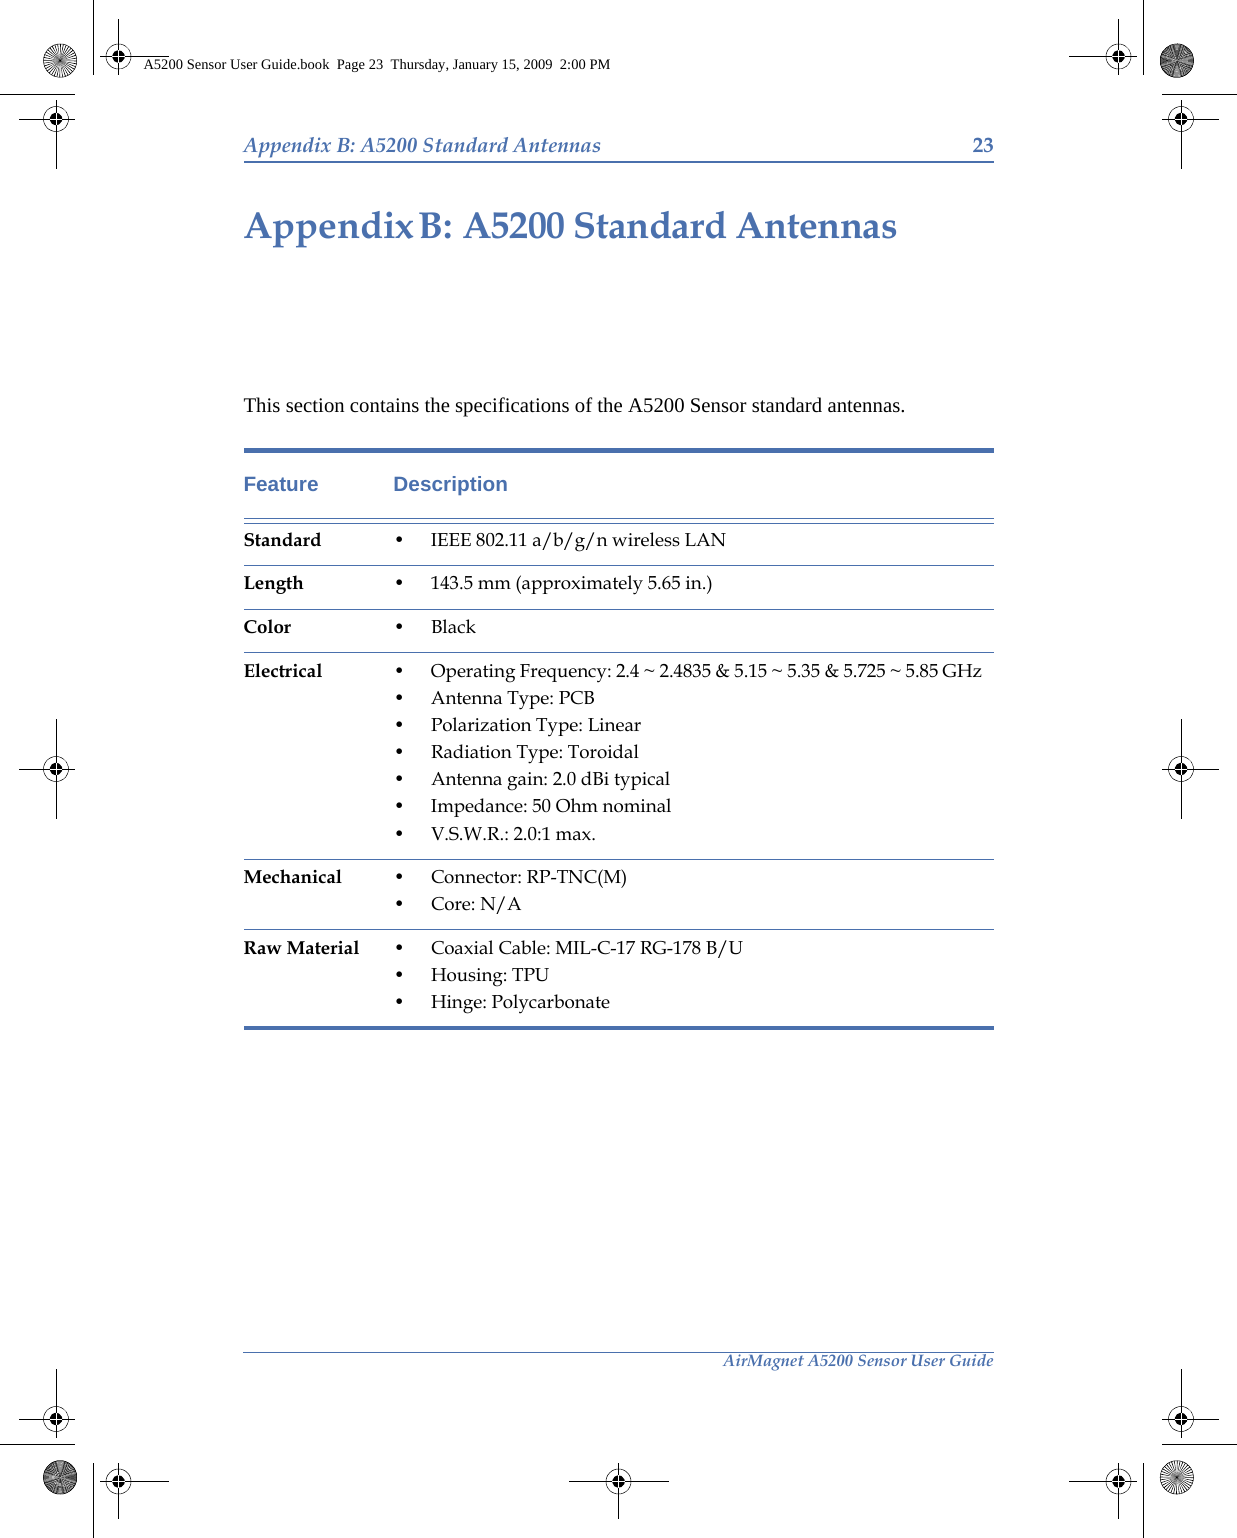 AirMagnet A5200 Sensor User GuideAppendix B: A5200 Standard Antennas 23A5200 Standard AntennasAppendix B:This section contains the specifications of the A5200 Sensor standard antennas.Feature DescriptionStandard • IEEE 802.11 a/b/g/n wireless LANLength • 143.5 mm (approximately 5.65 in.)Color •BlackElectrical • Operating Frequency: 2.4 ~ 2.4835 &amp; 5.15 ~ 5.35 &amp; 5.725 ~ 5.85 GHz• Antenna Type: PCB• Polarization Type: Linear• Radiation Type: Toroidal• Antenna gain: 2.0 dBi typical• Impedance: 50 Ohm nominal• V.S.W.R.: 2.0:1 max.Mechanical • Connector: RP-TNC(M)•Core: N/ARaw Material • Coaxial Cable: MIL-C-17 RG-178 B/U•Housing: TPU• Hinge: PolycarbonateA5200 Sensor User Guide.book  Page 23  Thursday, January 15, 2009  2:00 PM